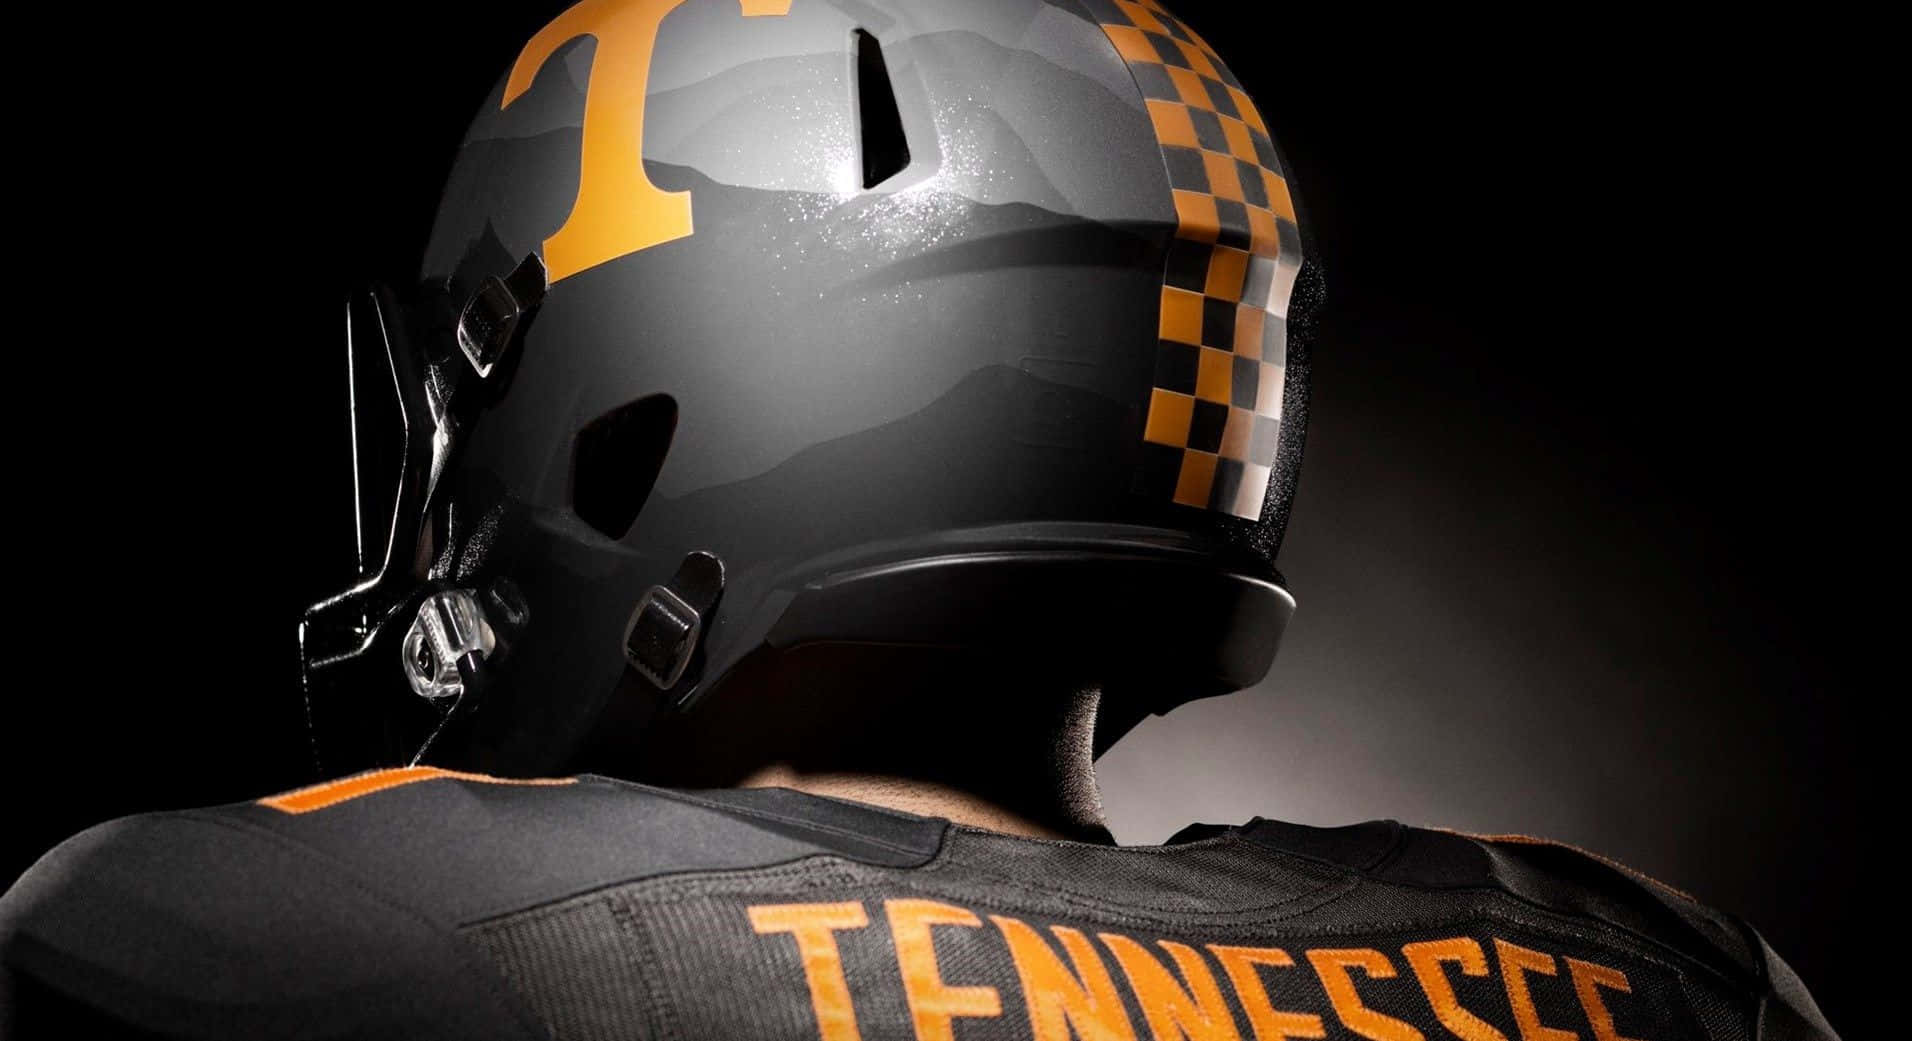 Tennessee Football Helmet With A Black And Orange Design Wallpaper